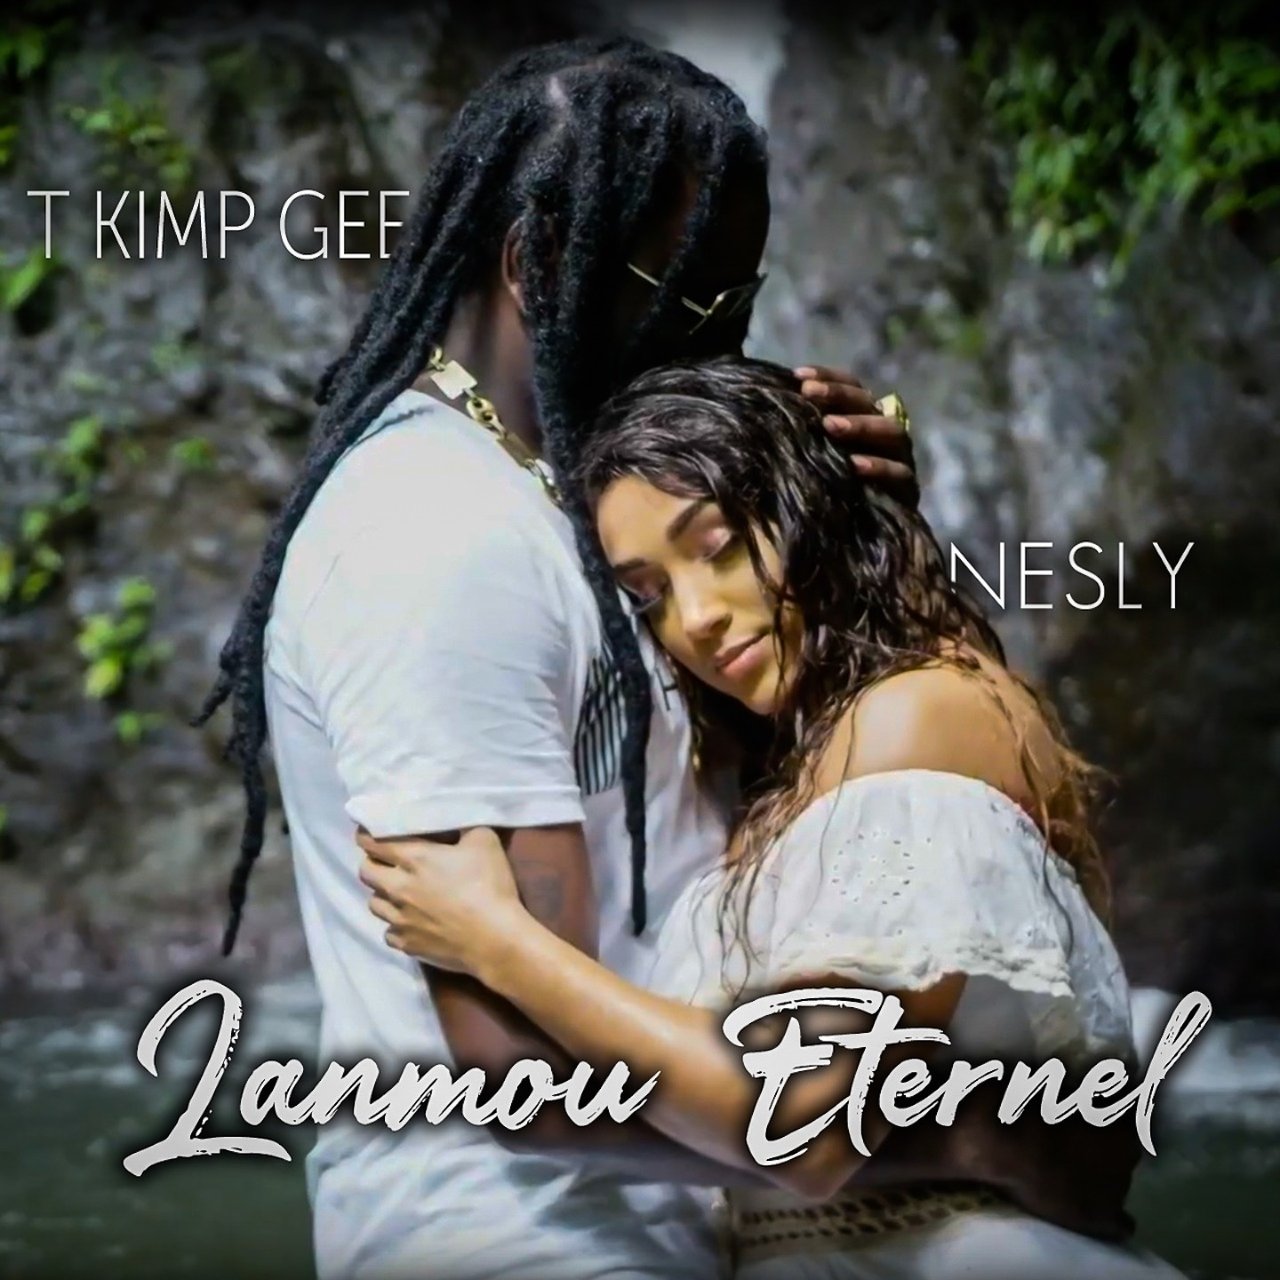 T Kimp Gee - Lanmou Eternel (ft. Nesly) (Cover)